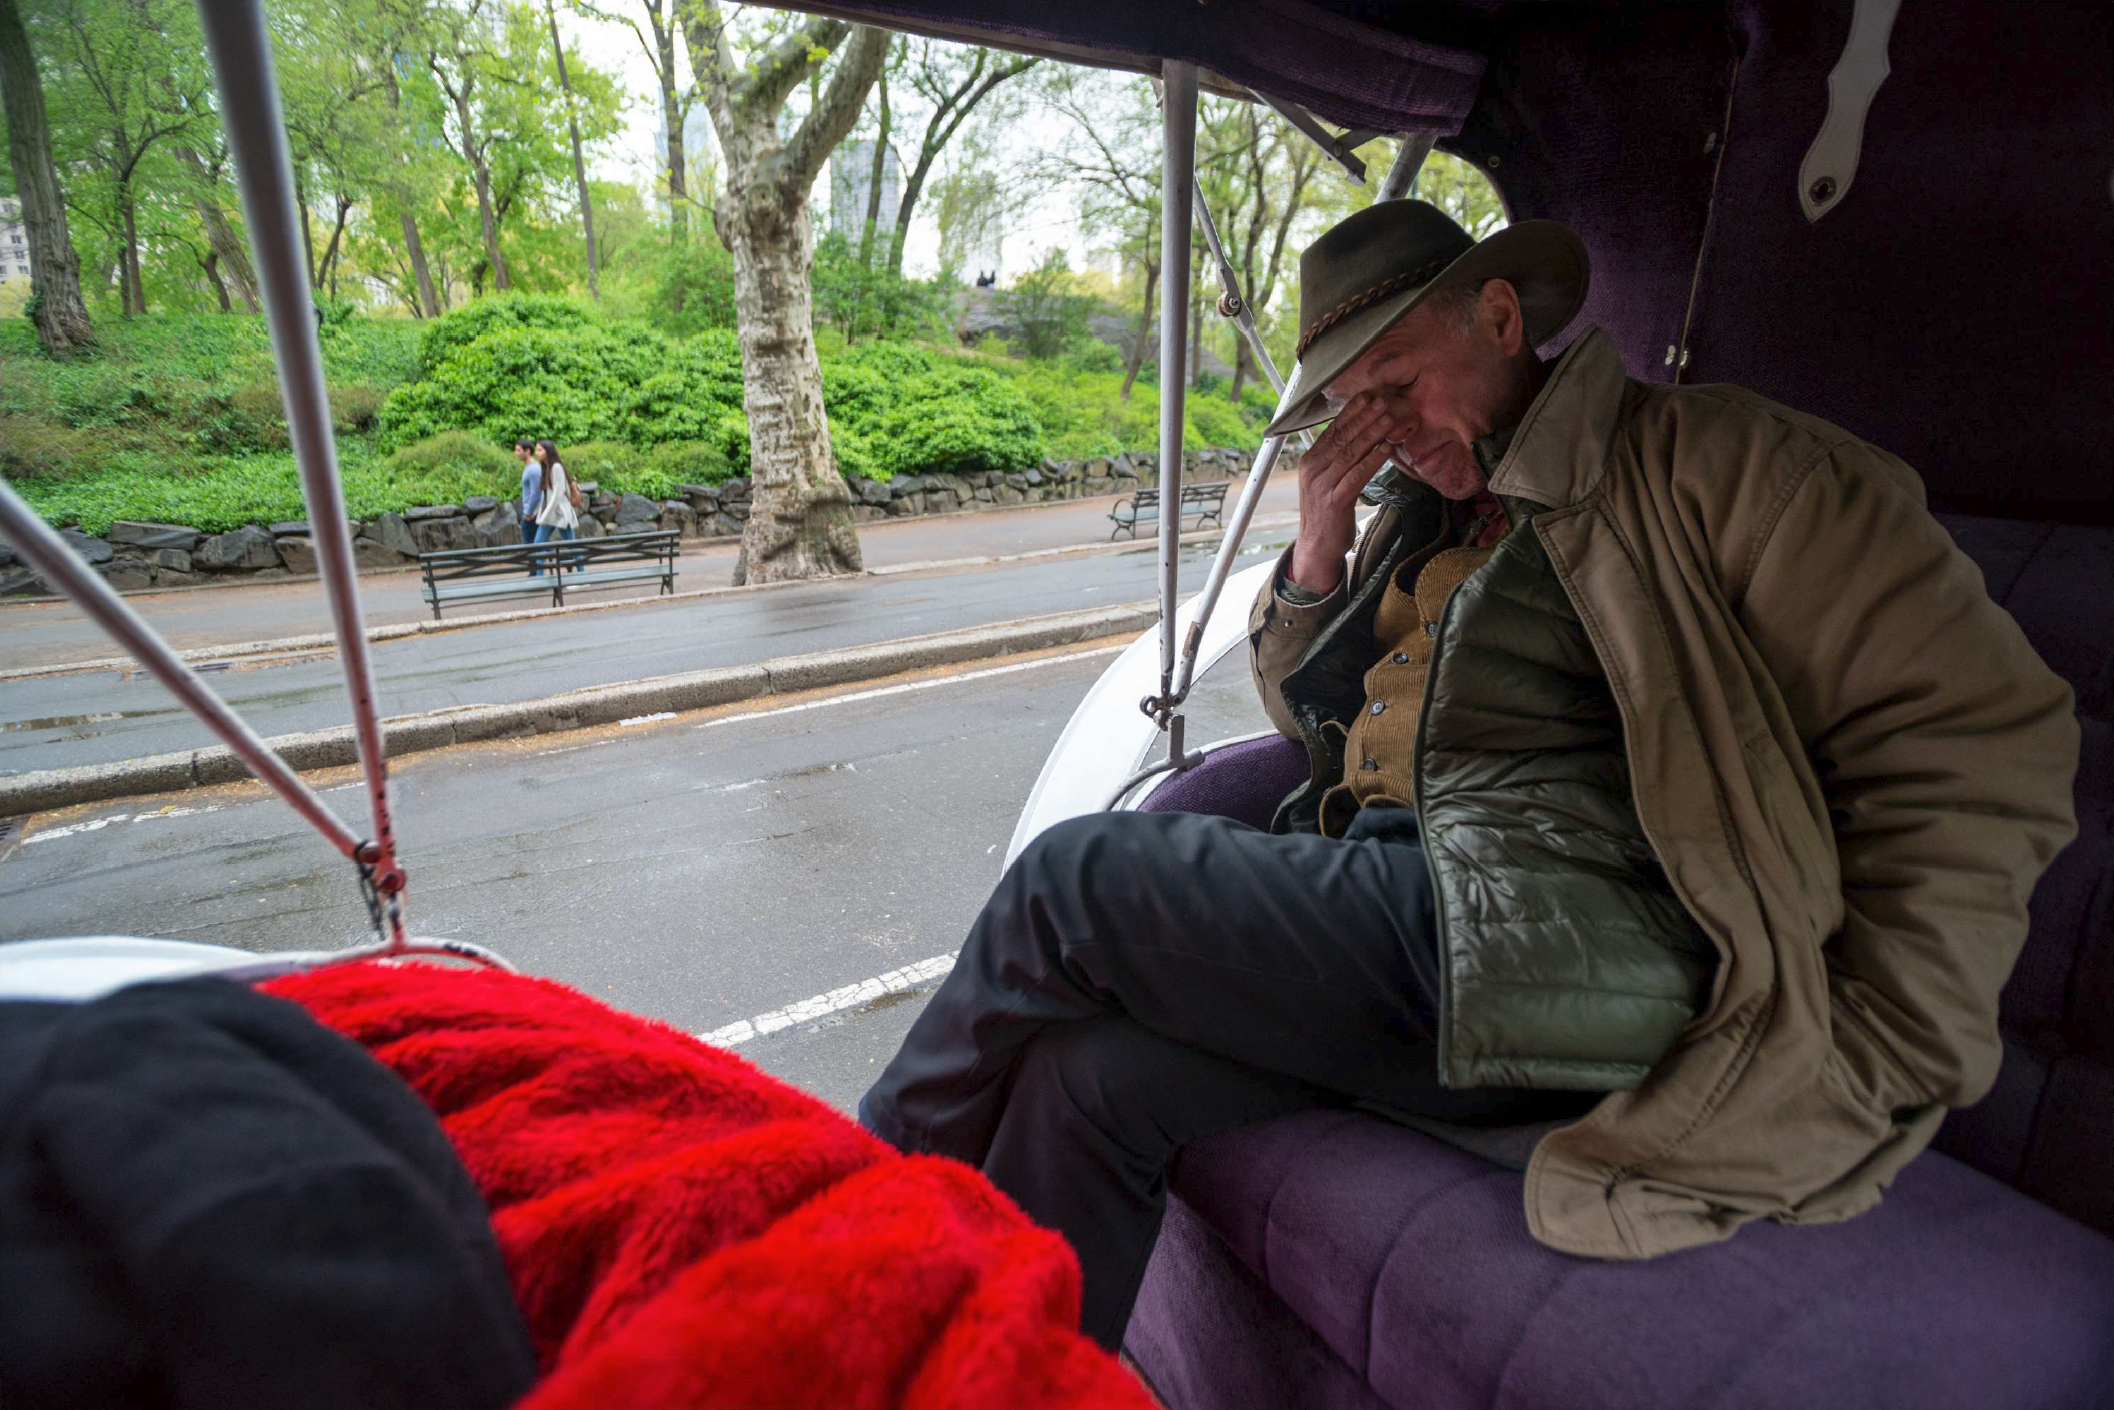  Ariel Fintzi waits for clients on the south east corner of Central Park, New York, April 2019. 